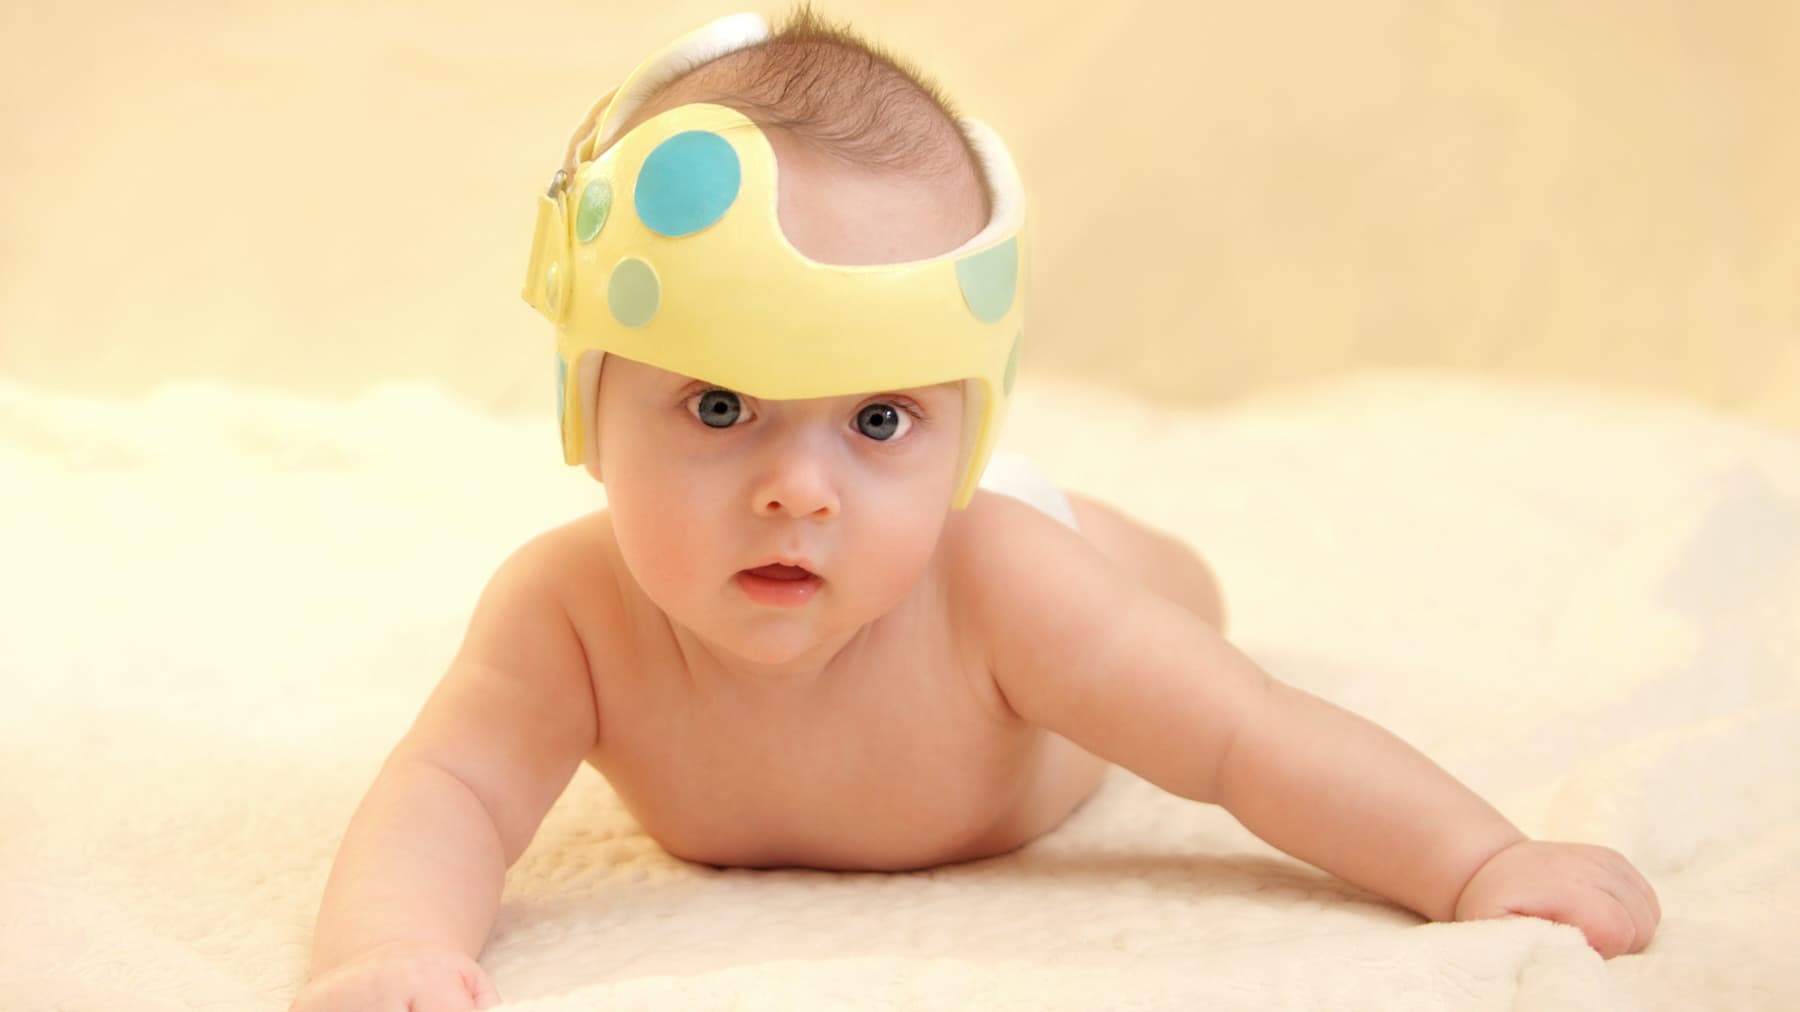 Does My Infant Need a Helmet? Understanding Positional Plagiocephaly